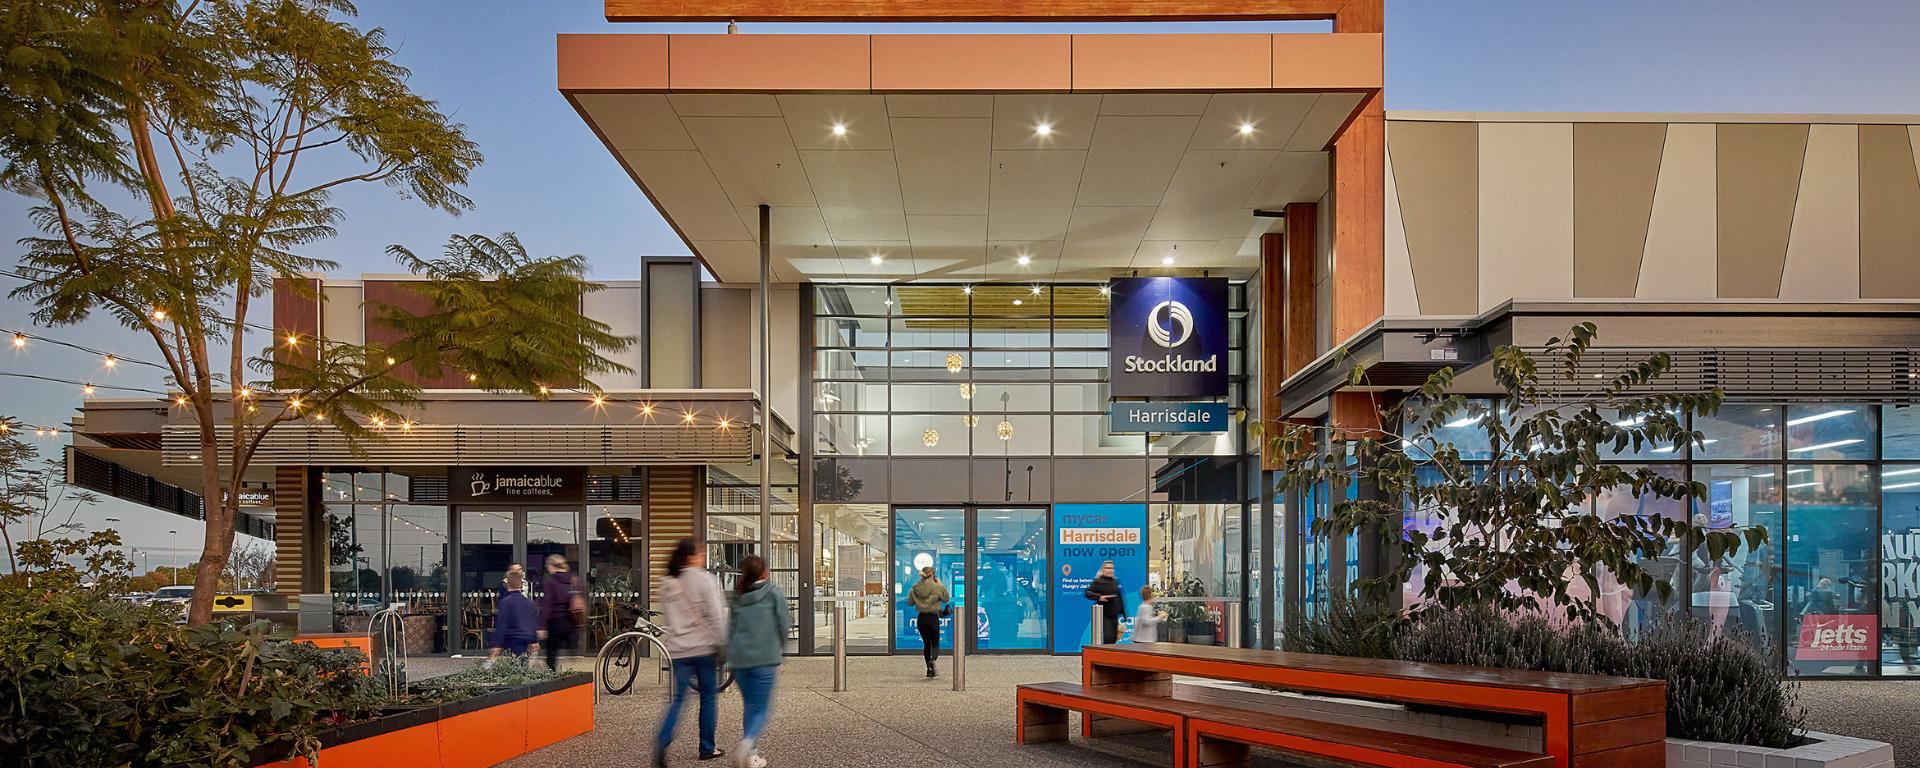 Stockland Harrisdale external entry